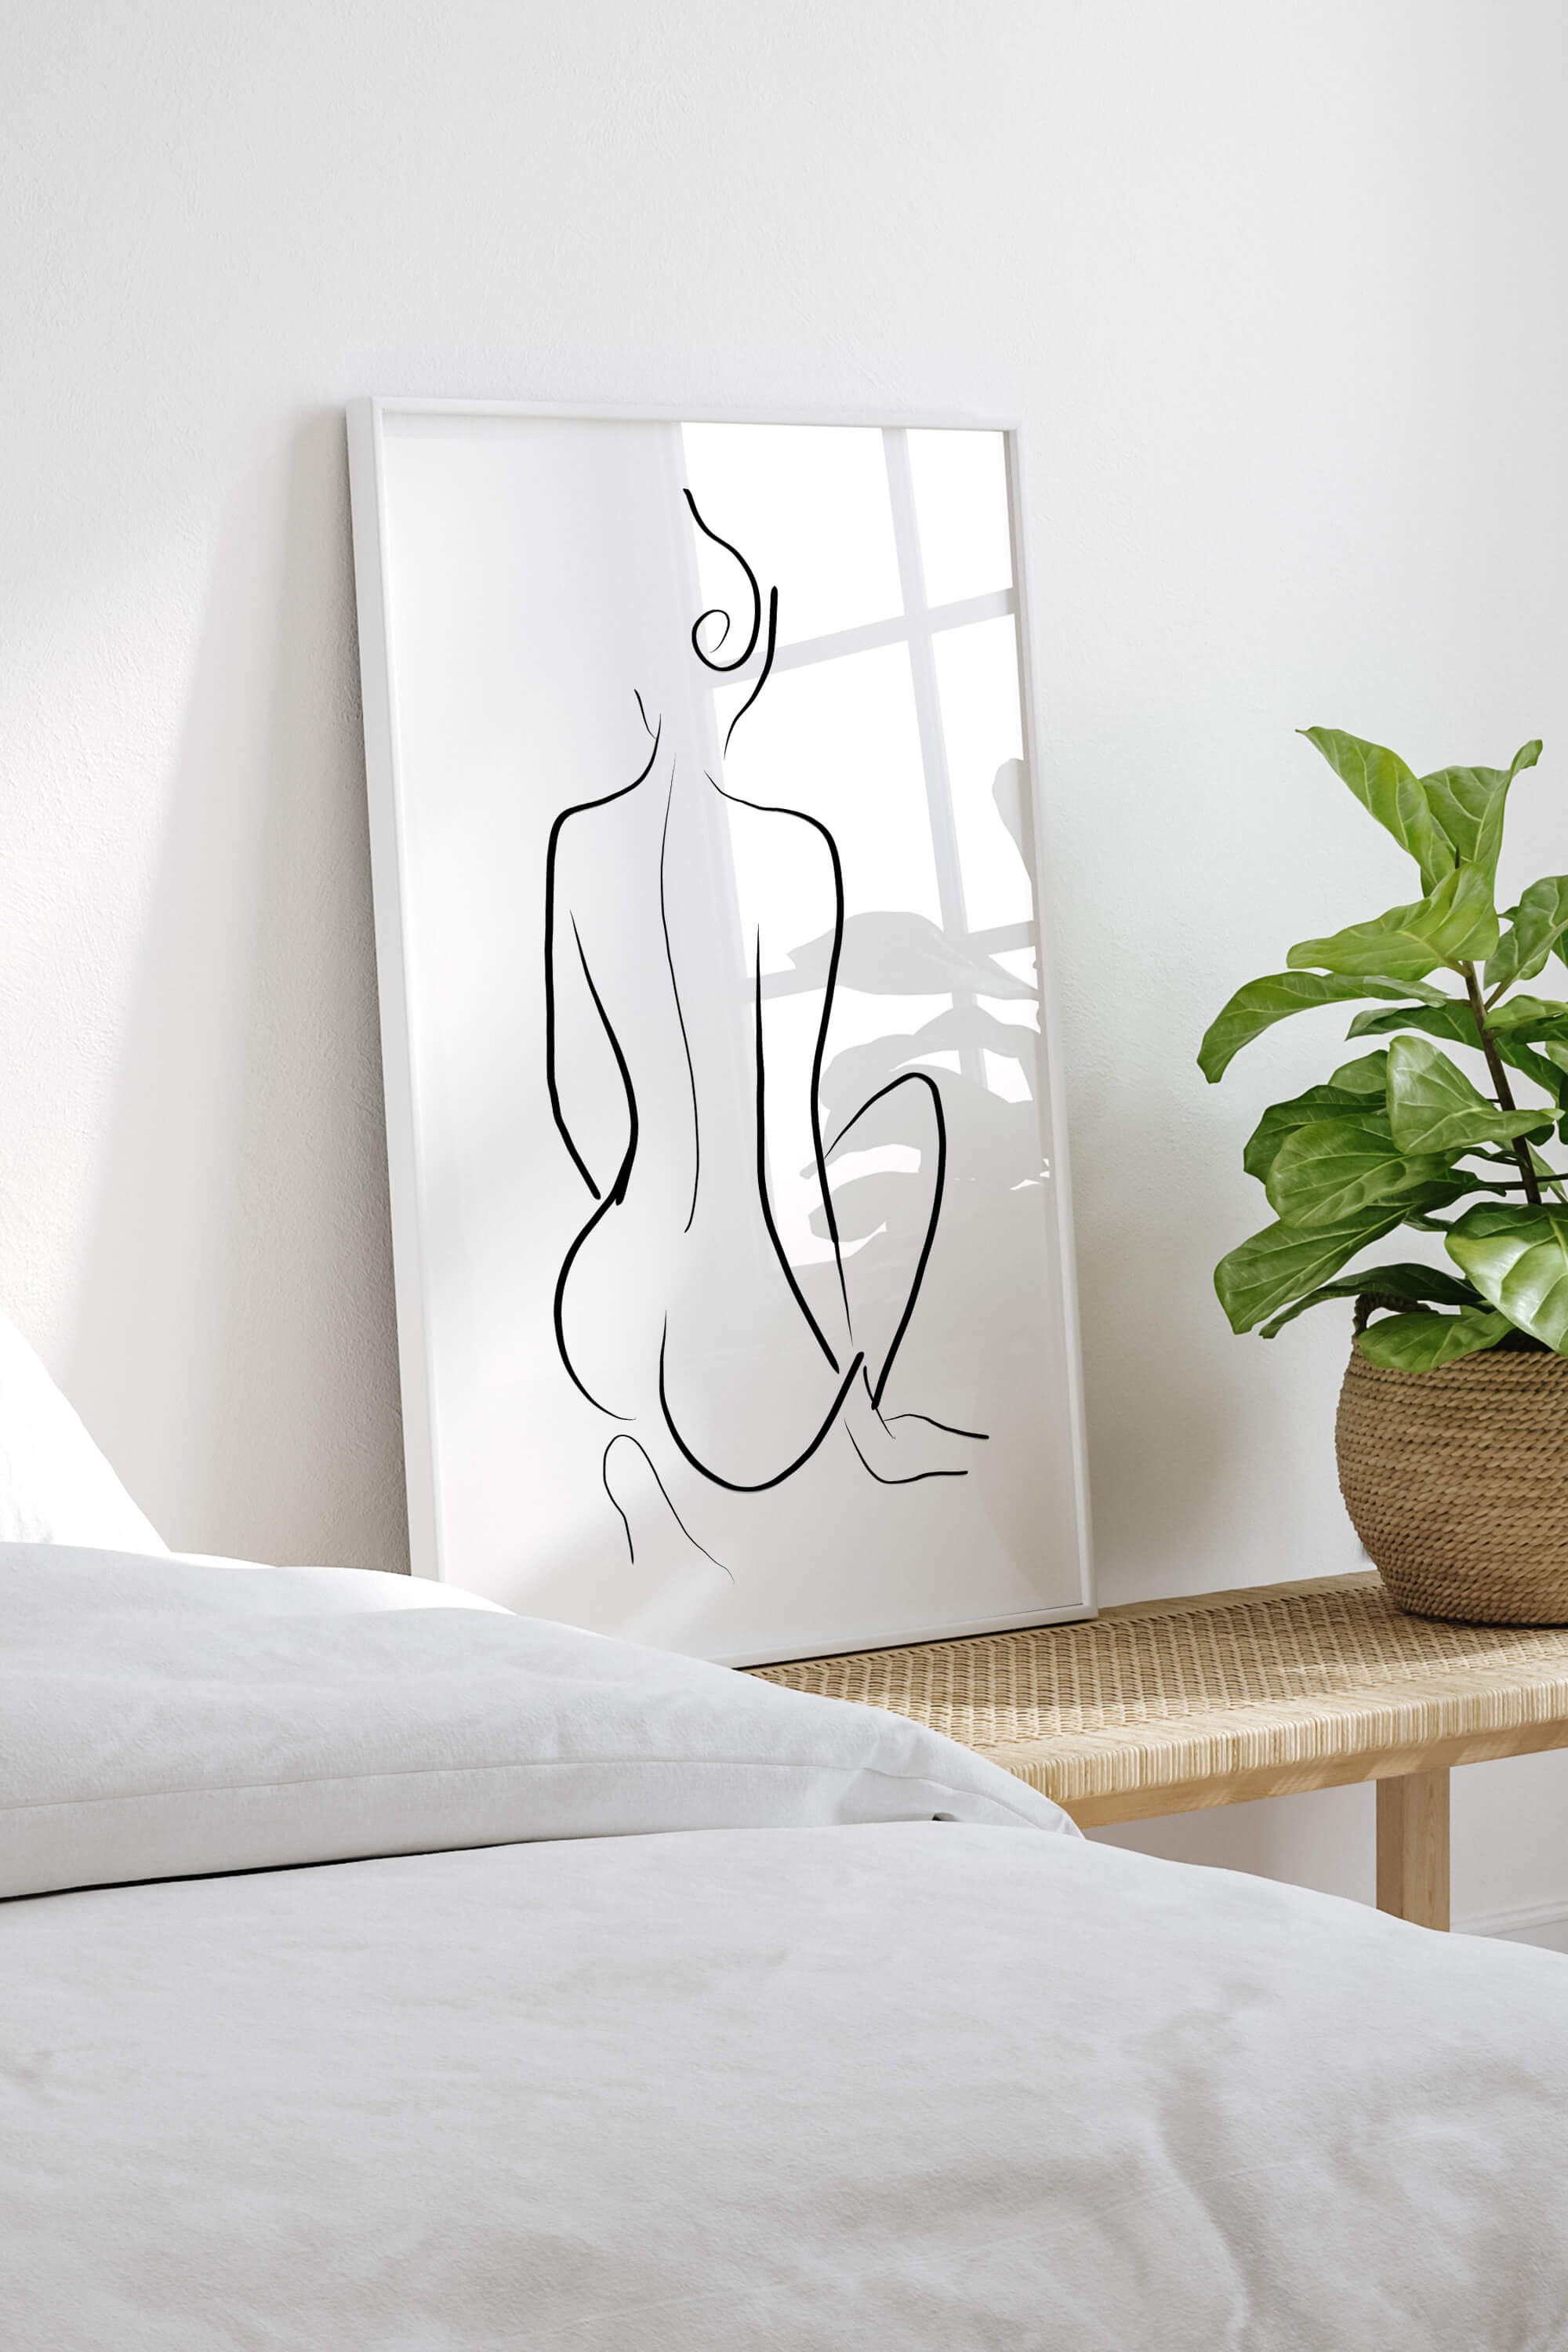 Elegant nude woman poster redefines your living space. Delicate curves and monochrome palette speak to the soul. Limited edition artwork transcends art, becoming a captivating experience.